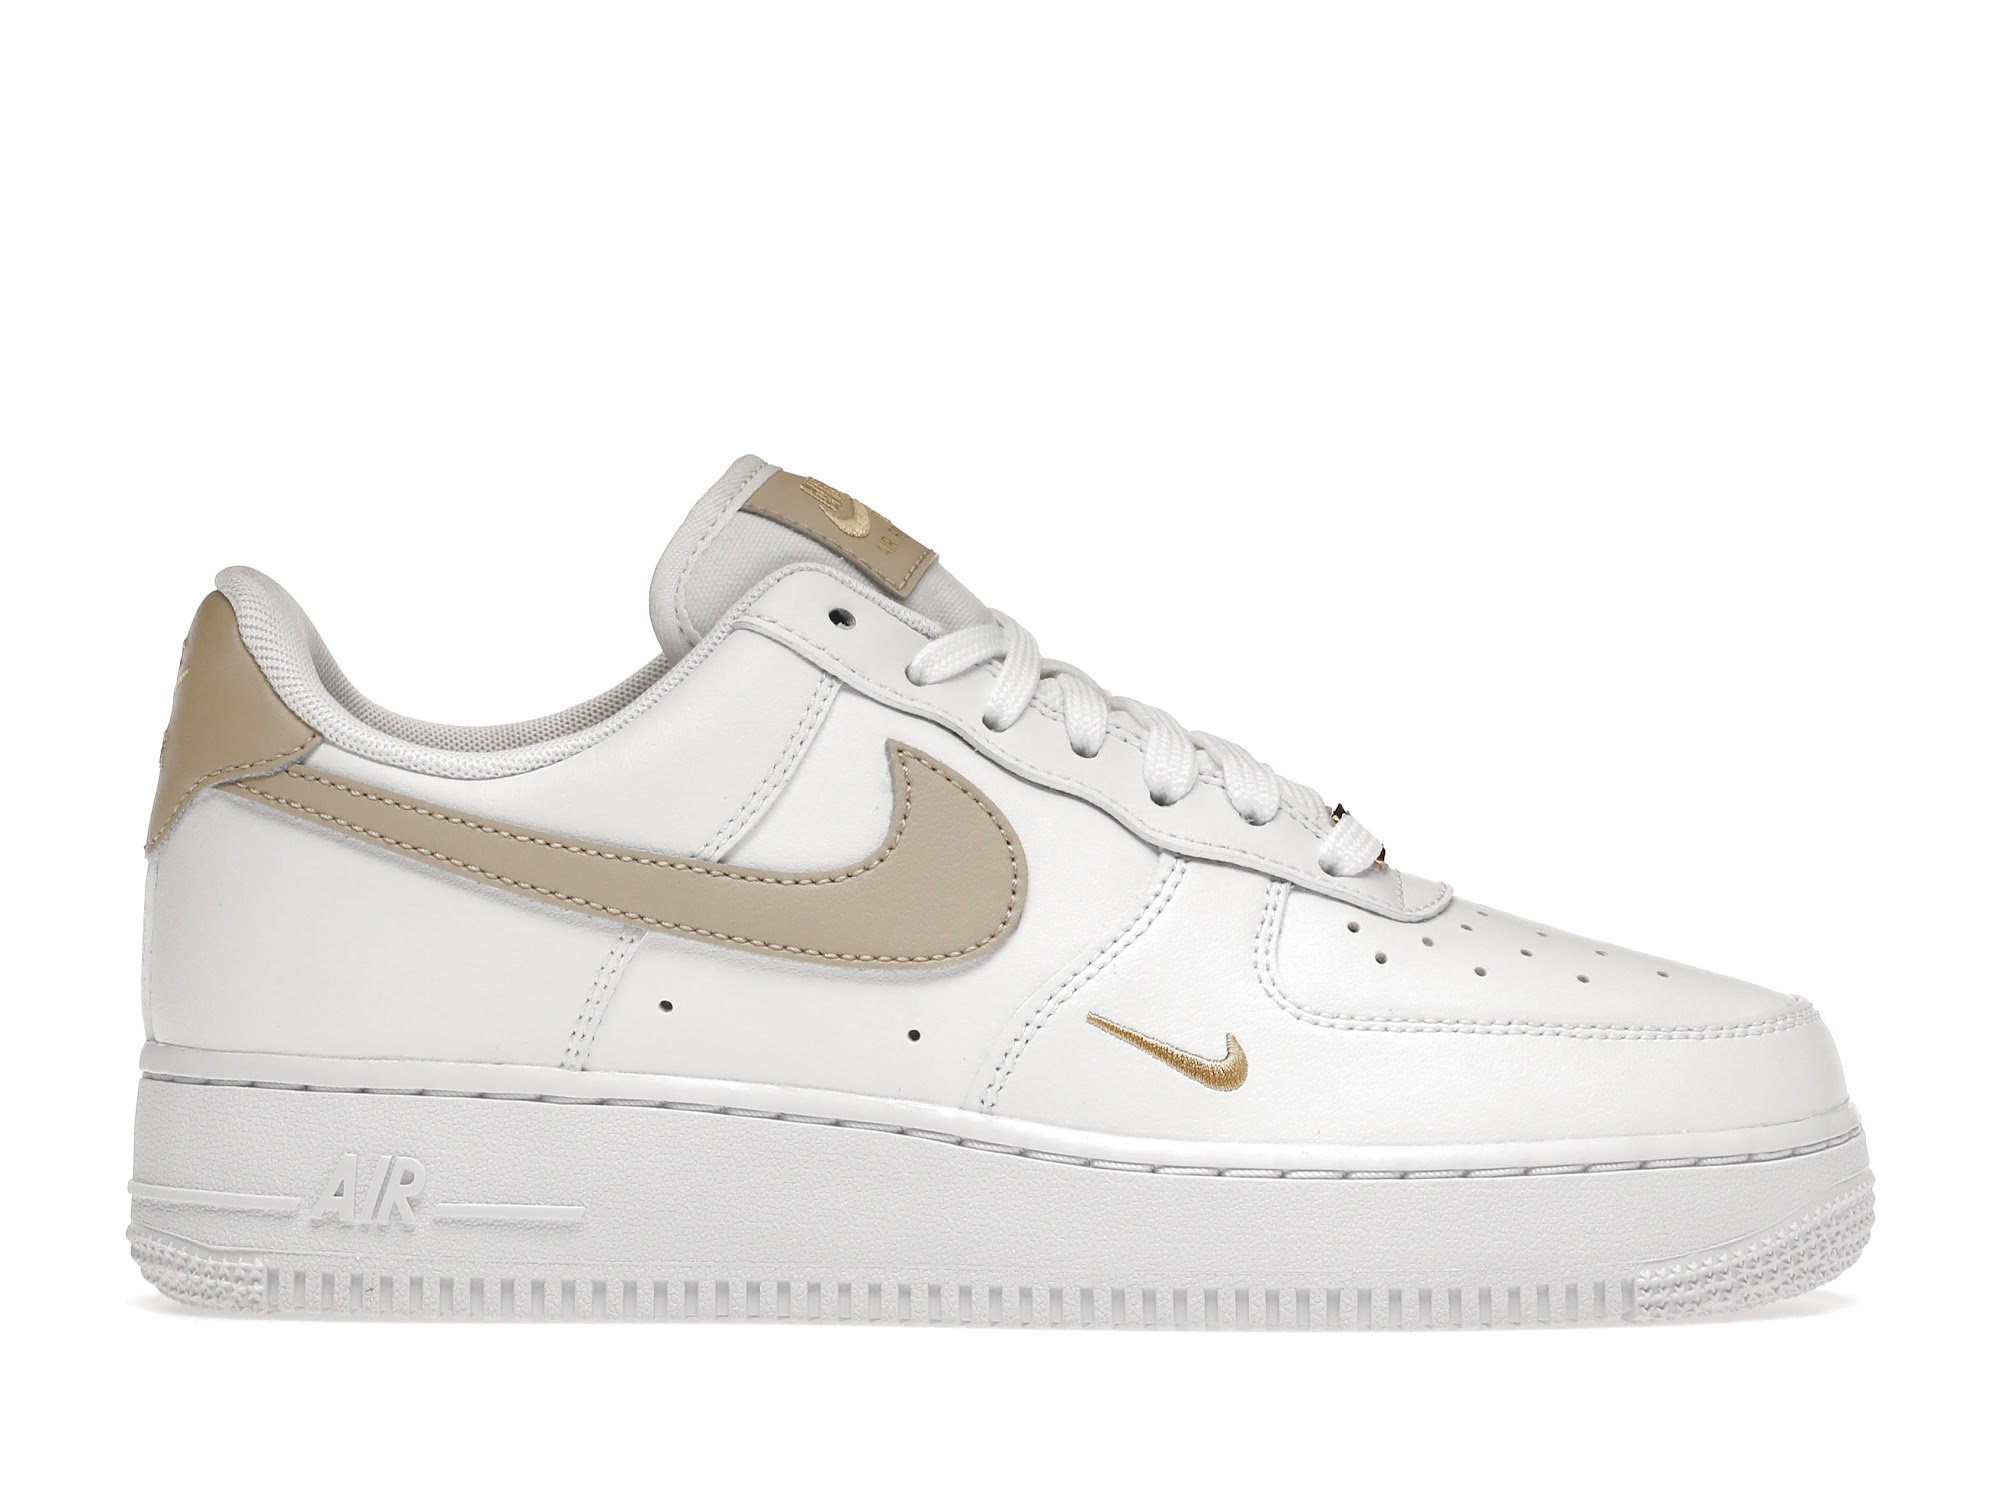 Nike Air Force 1 Low '07 Essential White Beige (Women's) - CZ0270